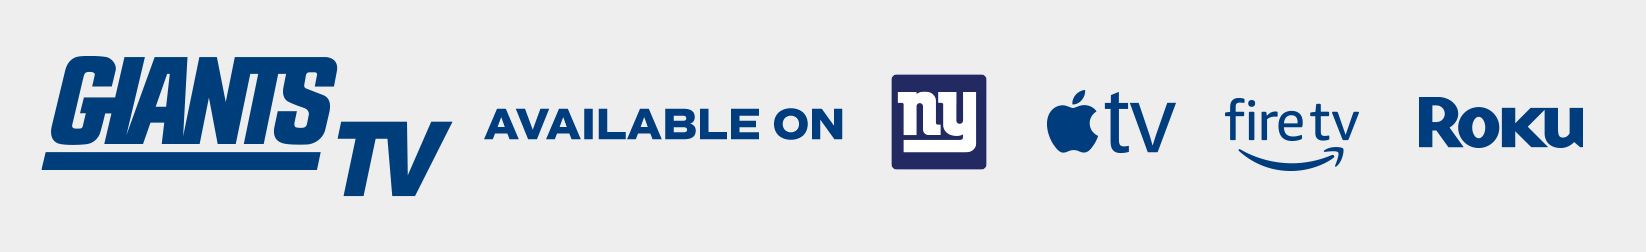 New York Giants Connected TV for Roku and Apple TV